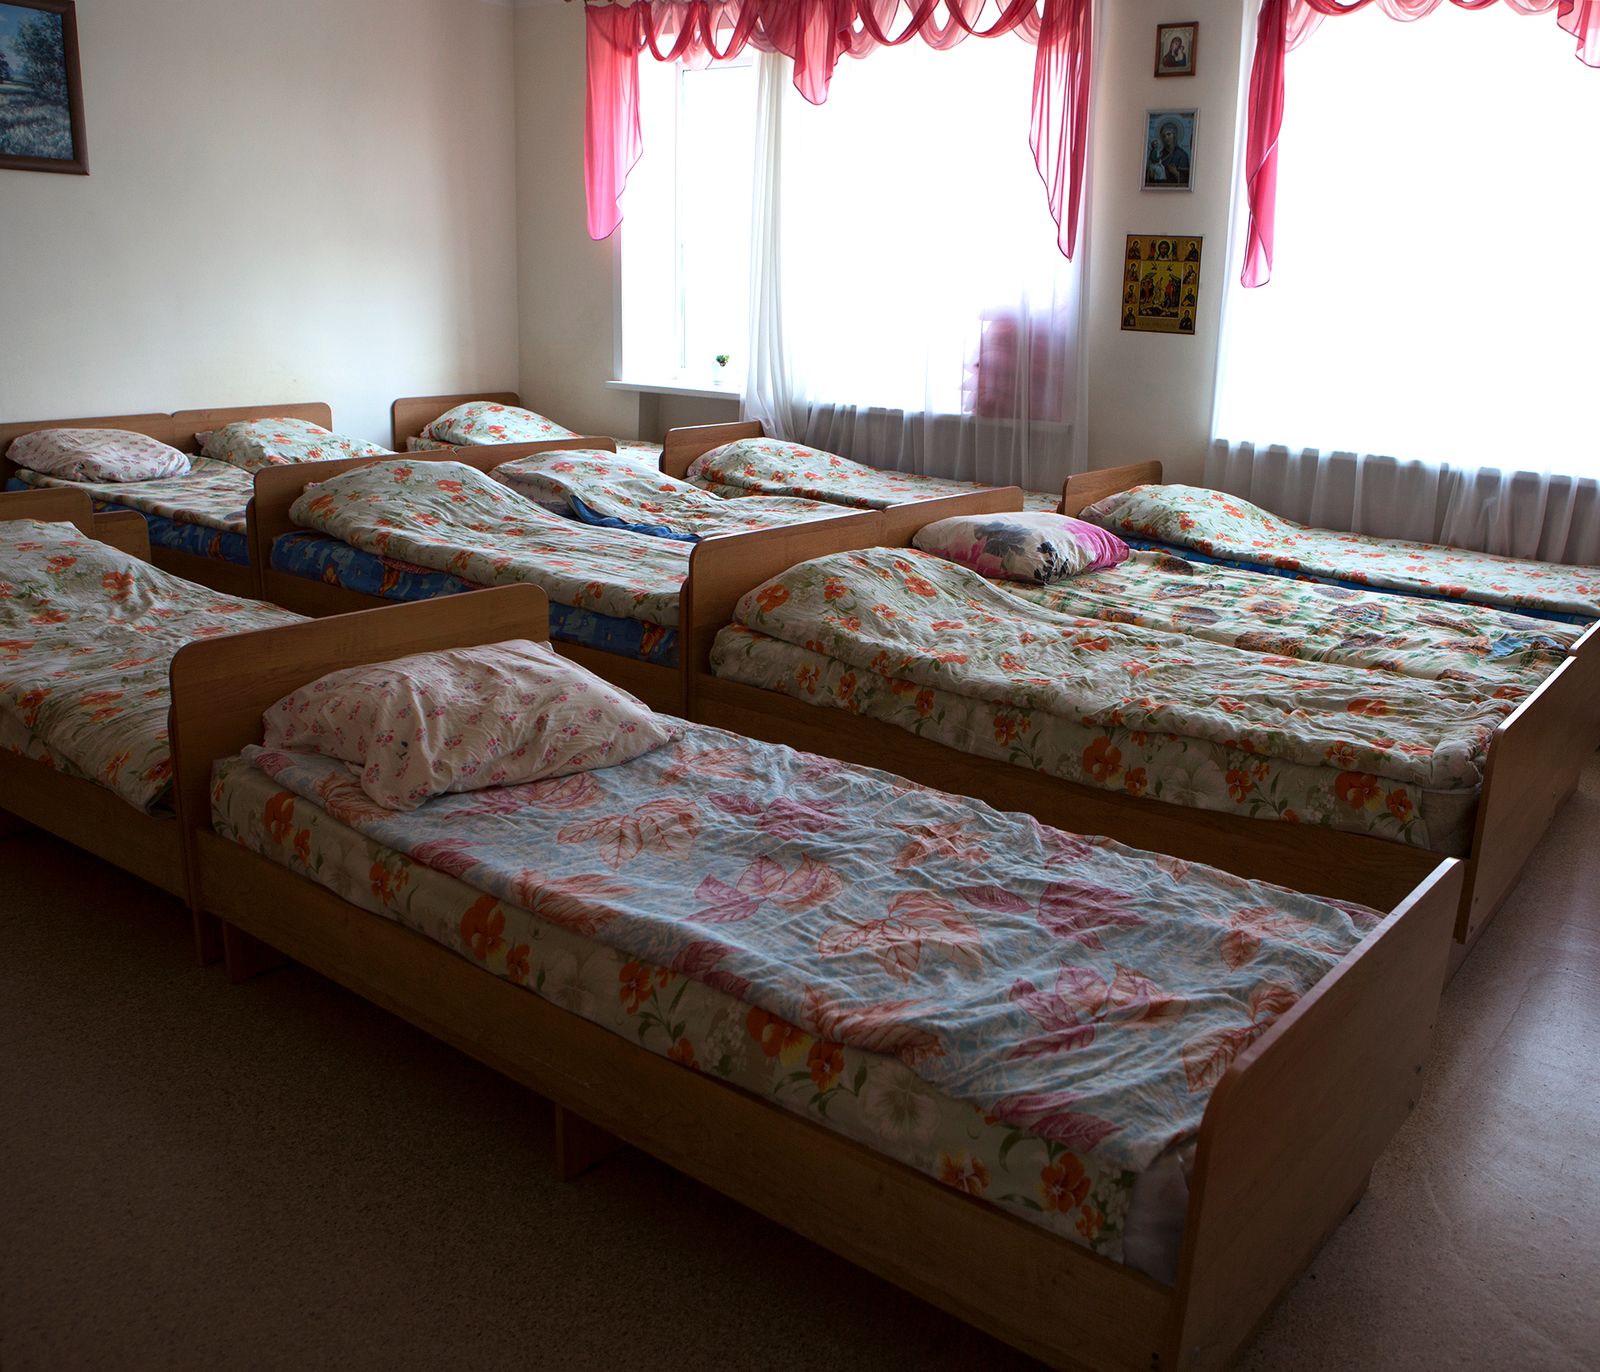 © Jadwiga Bronte - Room with multiple rows of beds. Couples have no privacy, residents are divided by sex and sleep in different rooms.